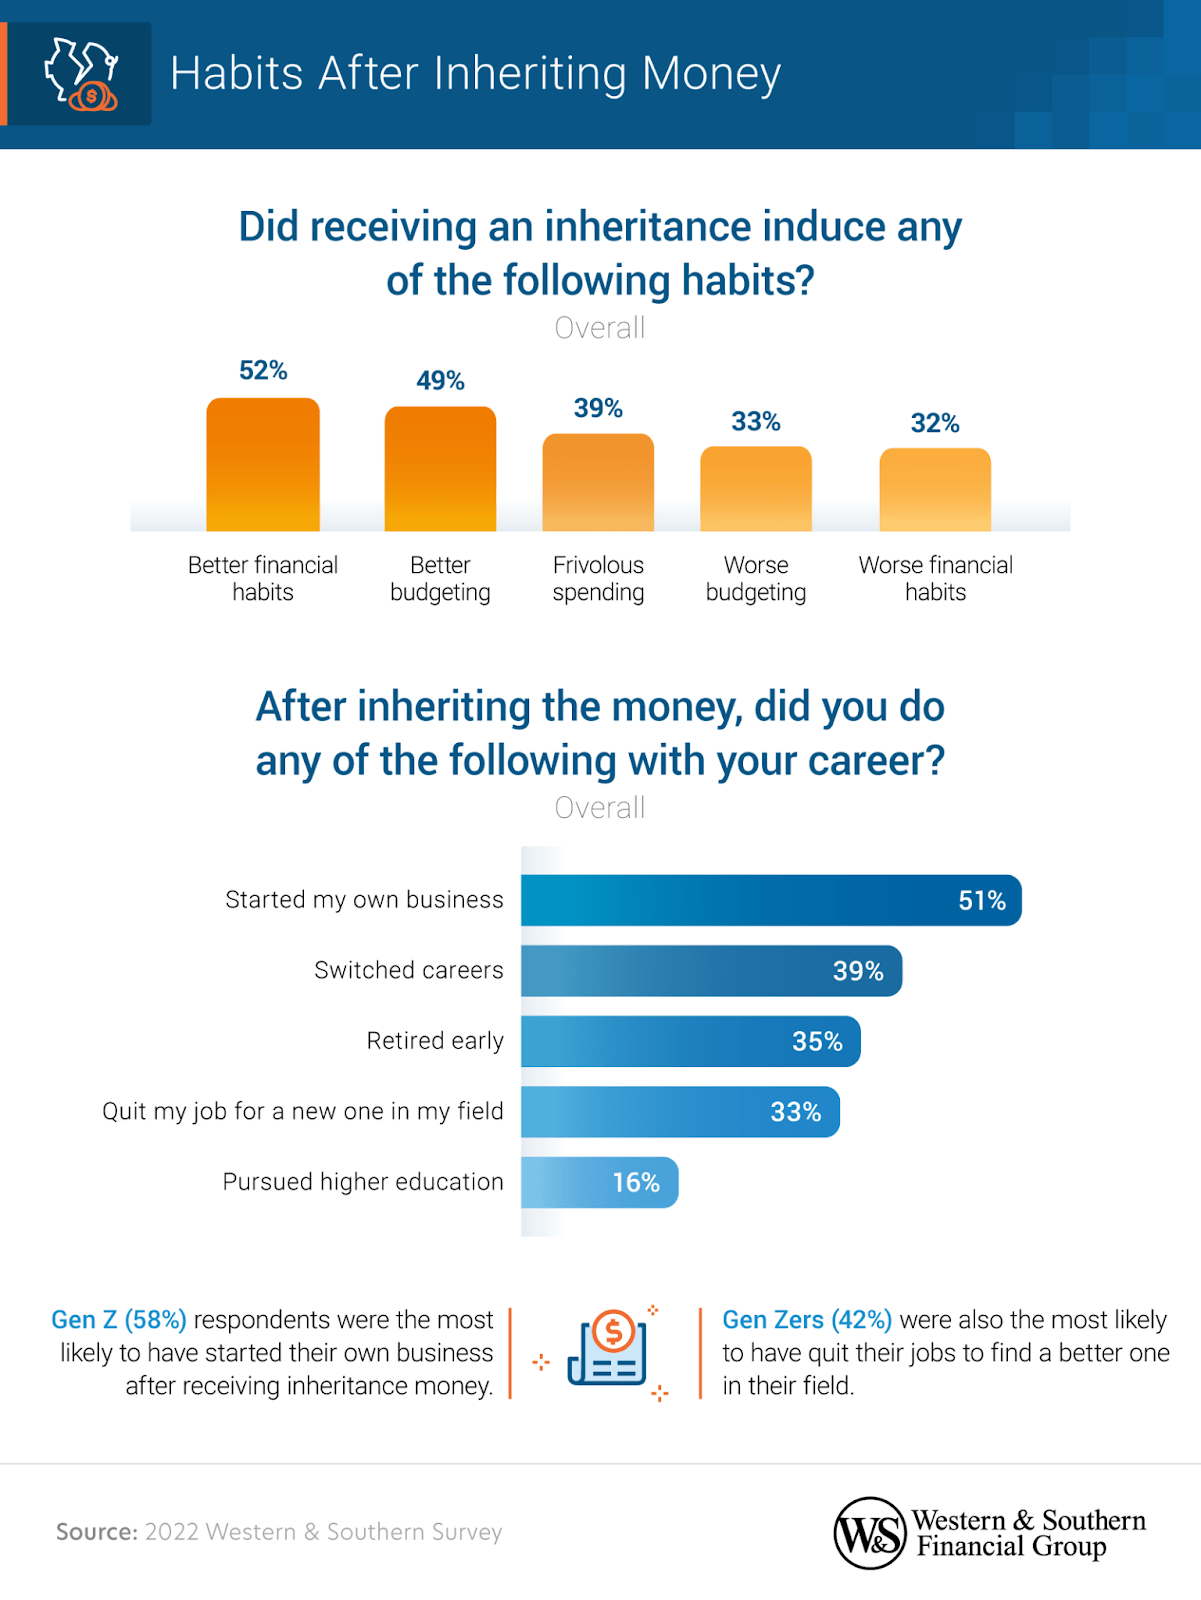 After receiving their inheritance money, 33% of those surveyed quit their job for a new one.